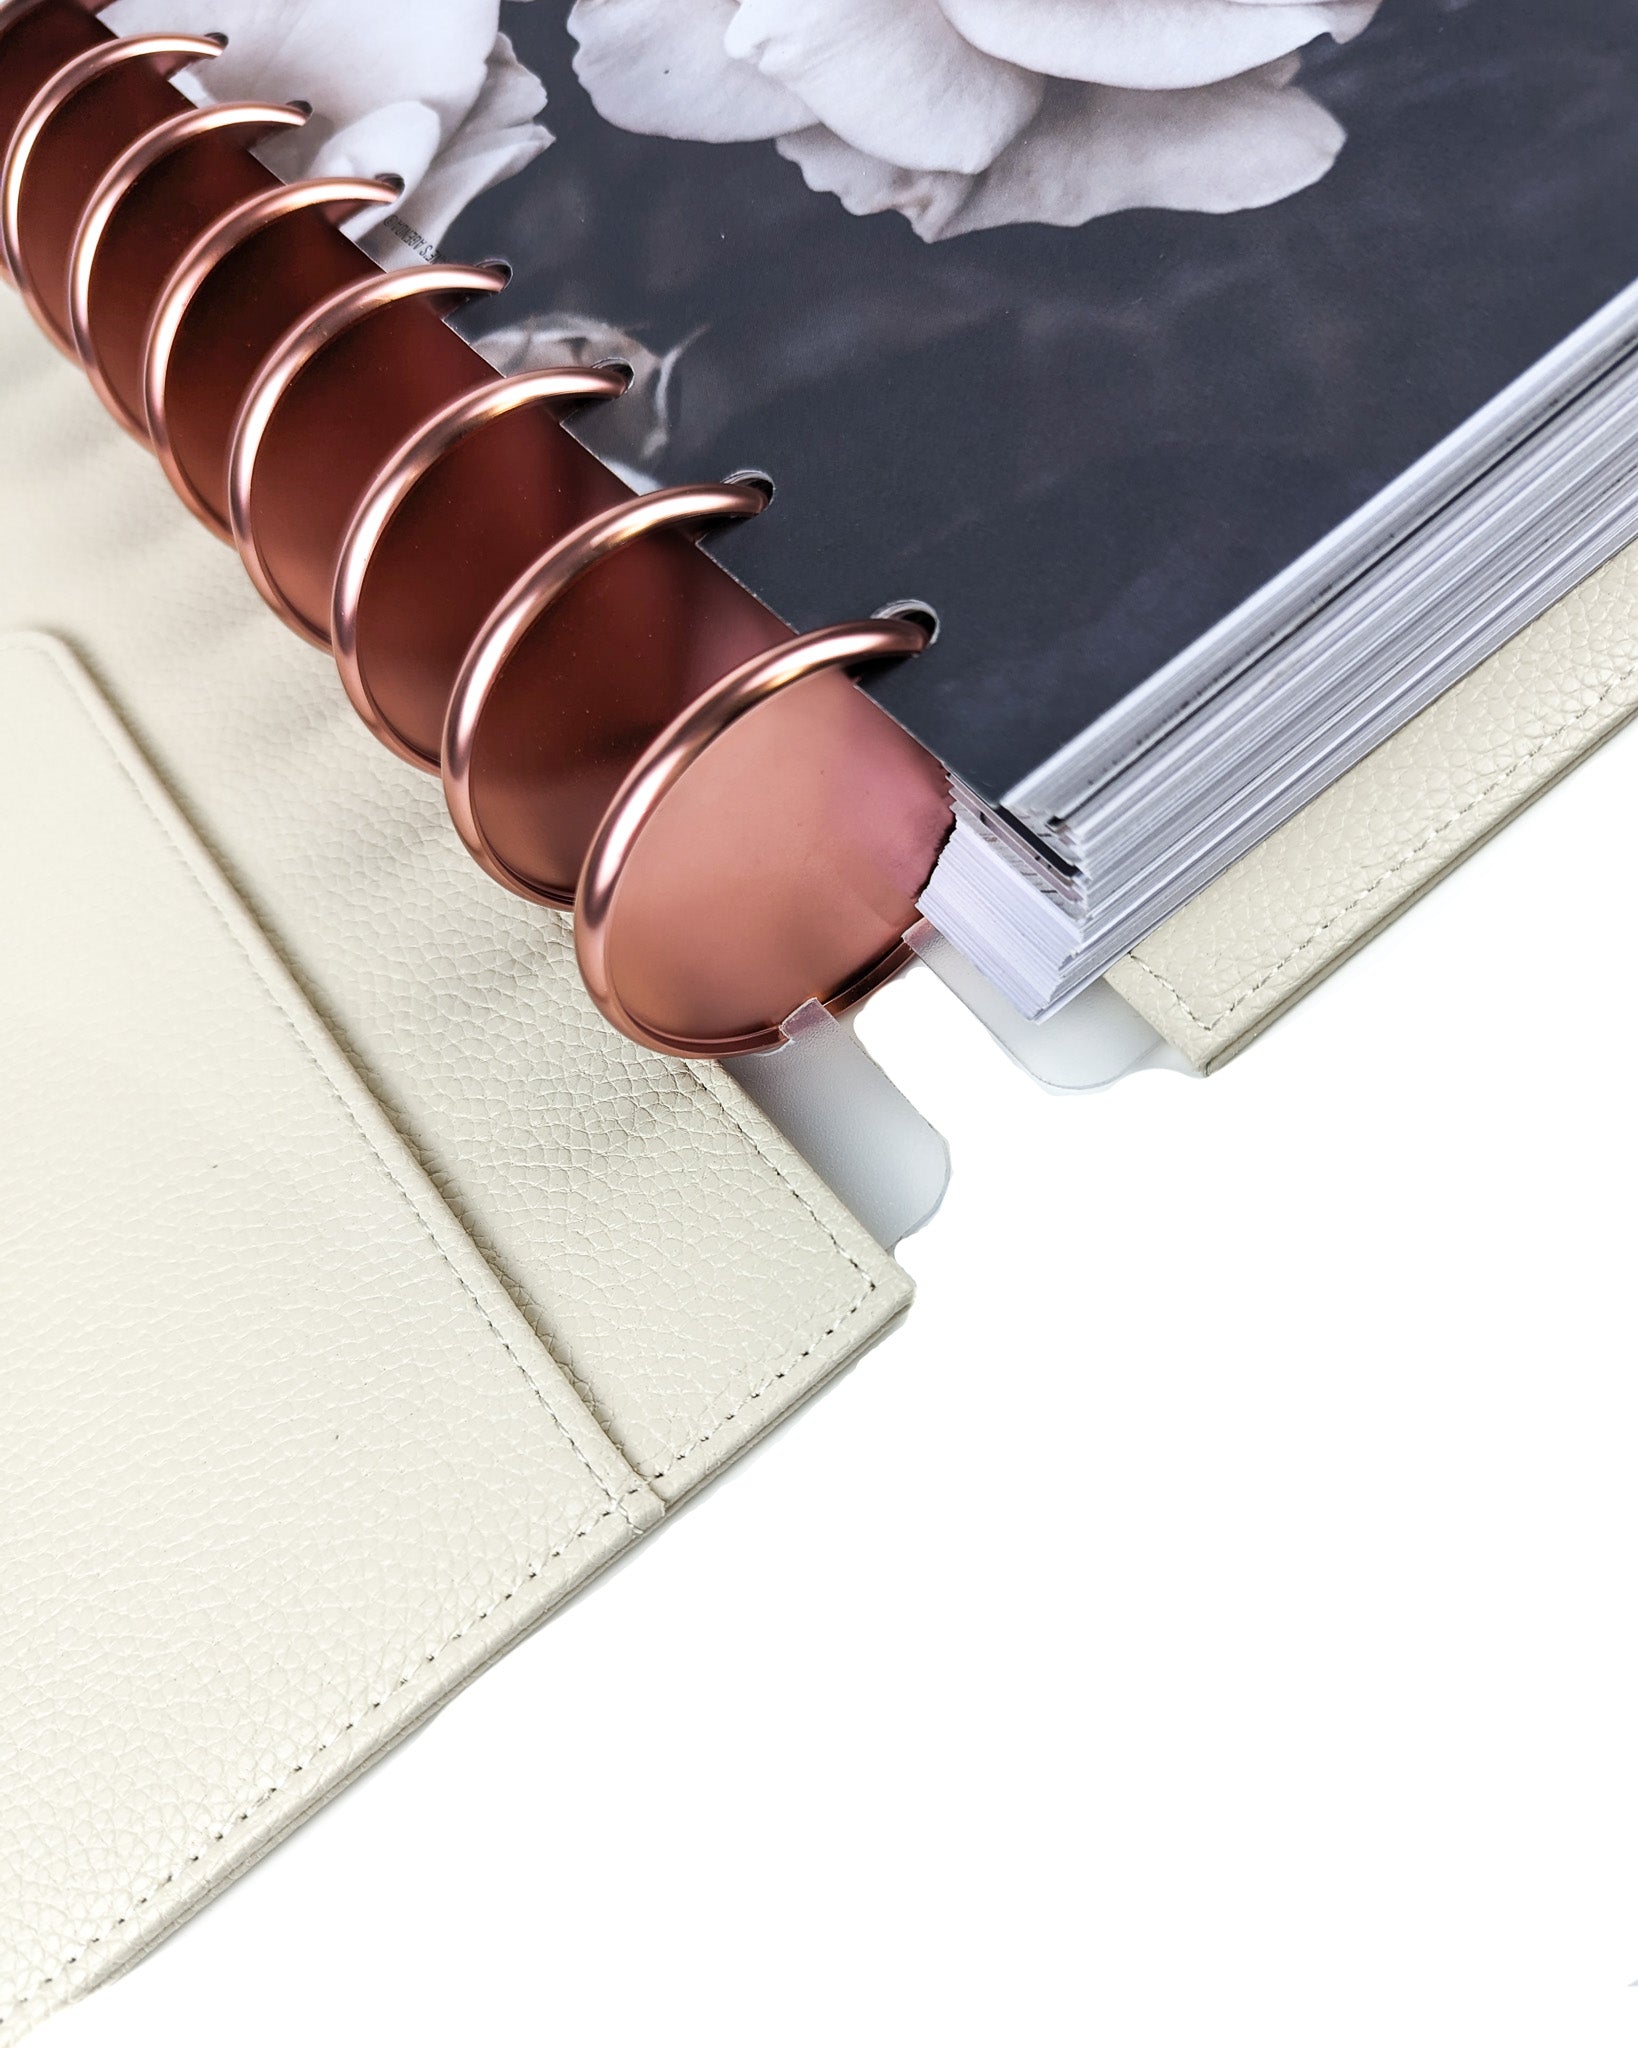 Shell vegan leather discbound planner cover by Jane's Agenda.